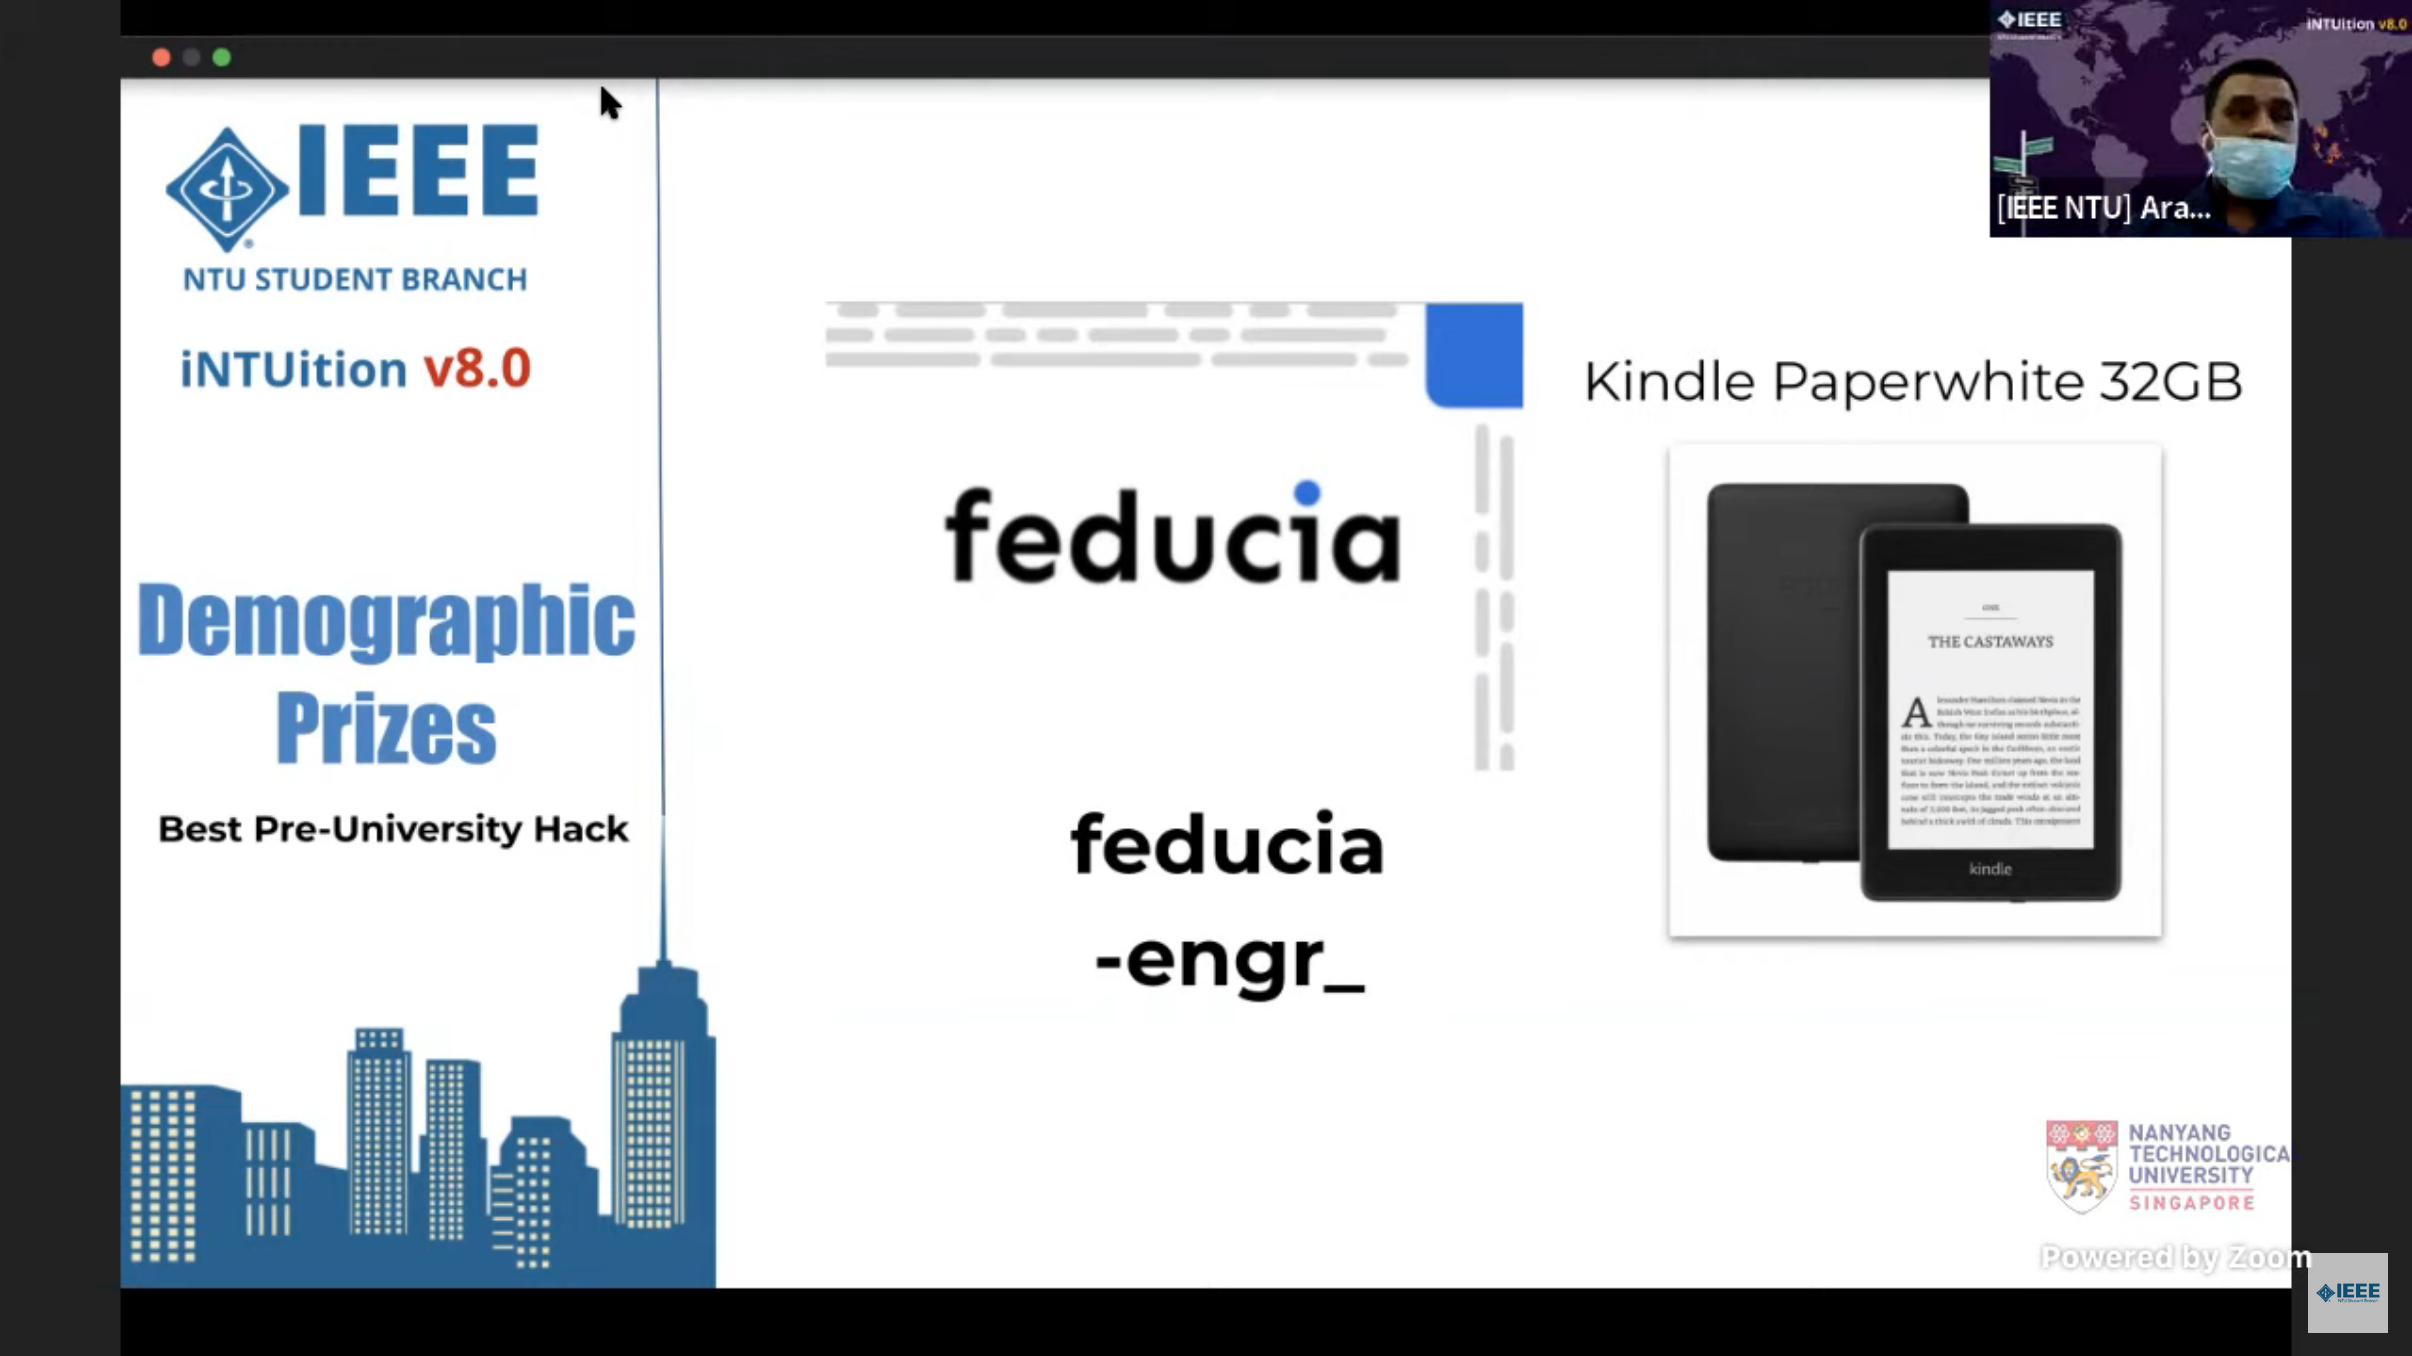 Our project, feducia, presented as Best Pre-University Hack